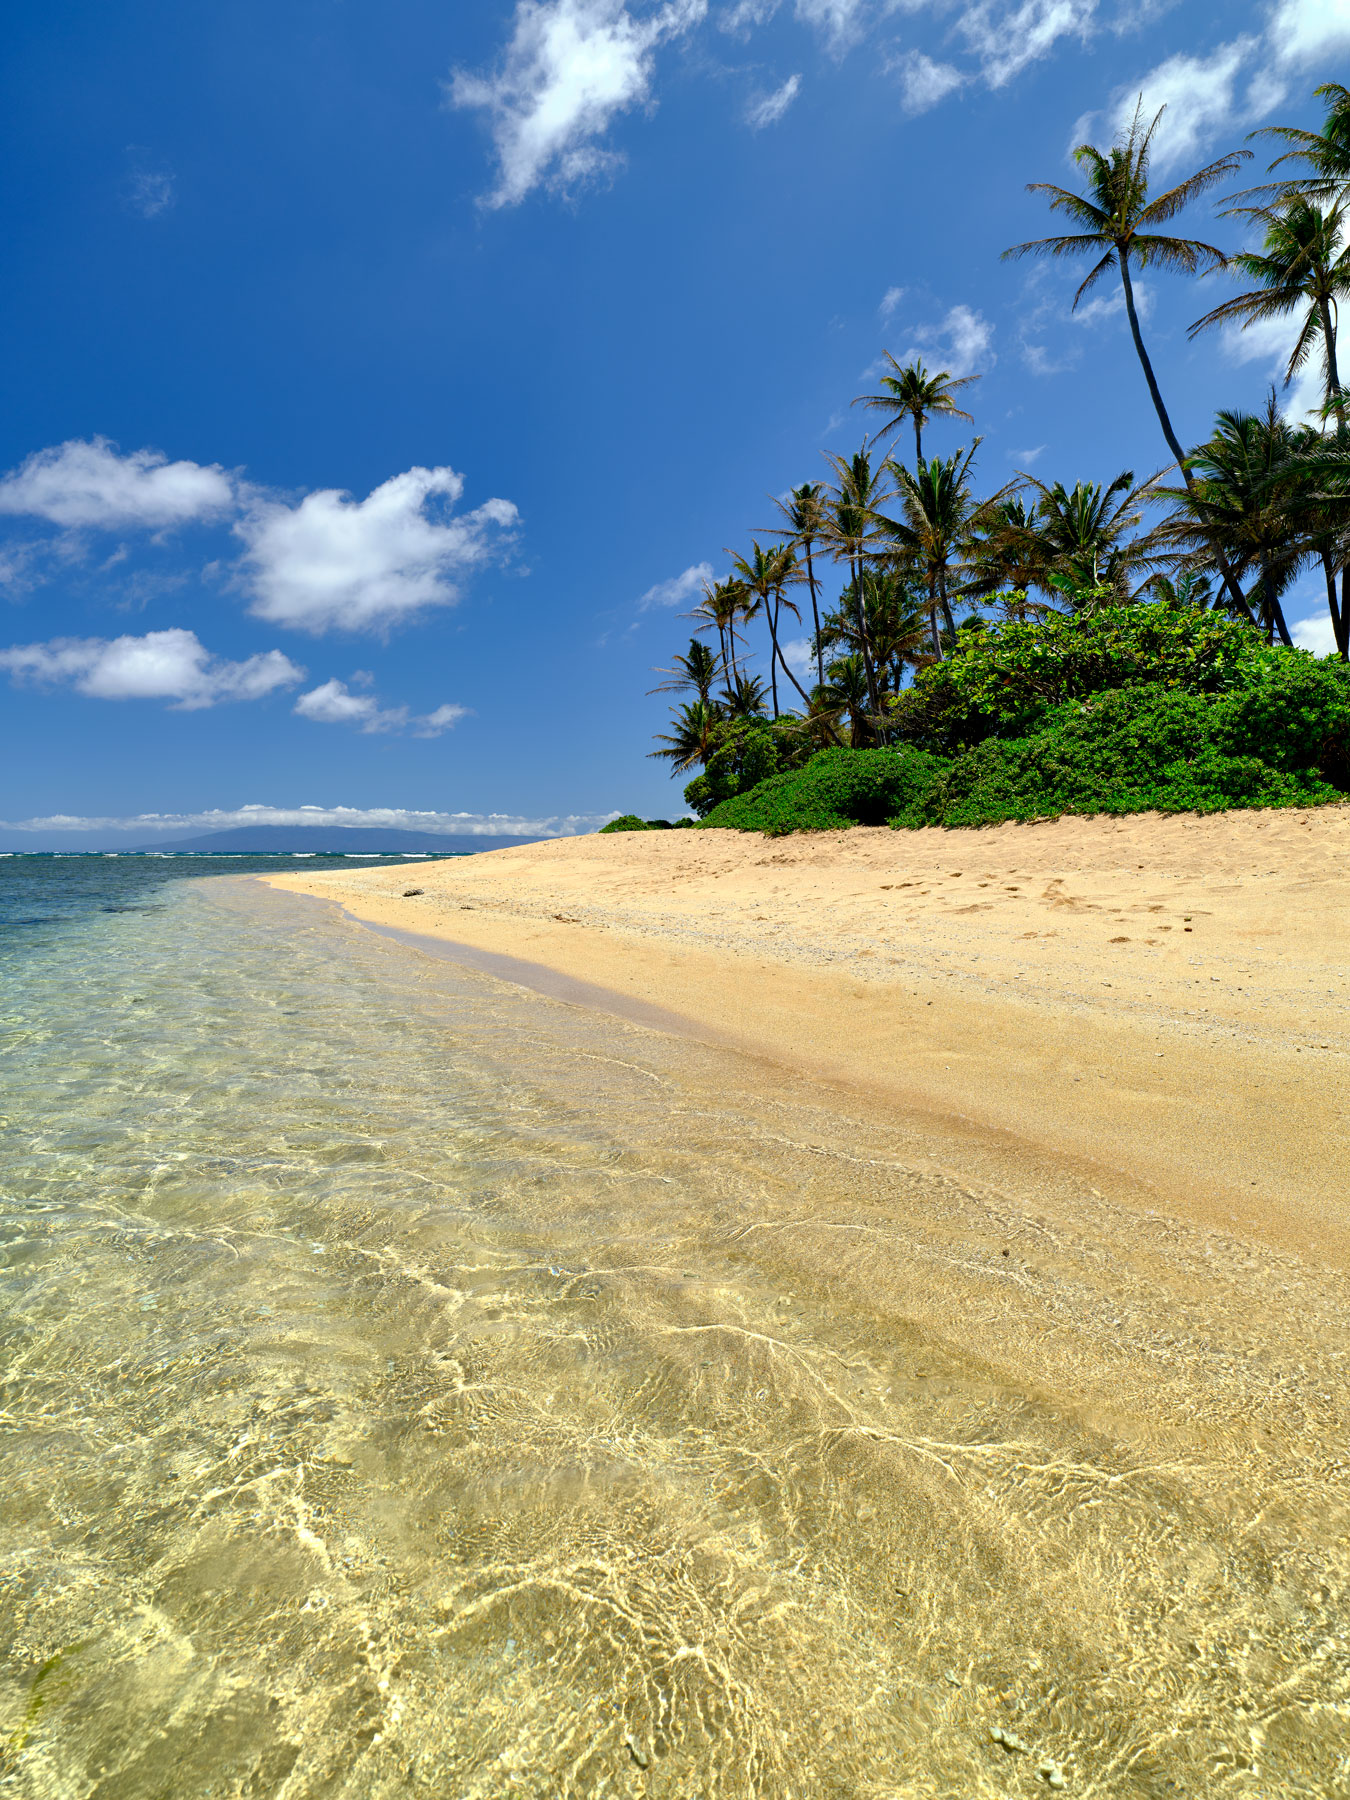 crystal clear tropical water washes up on to the beach at George Murphy beach park on the Hawaiian island of Molokai.  Tropical photography by Andrew Shoemaker